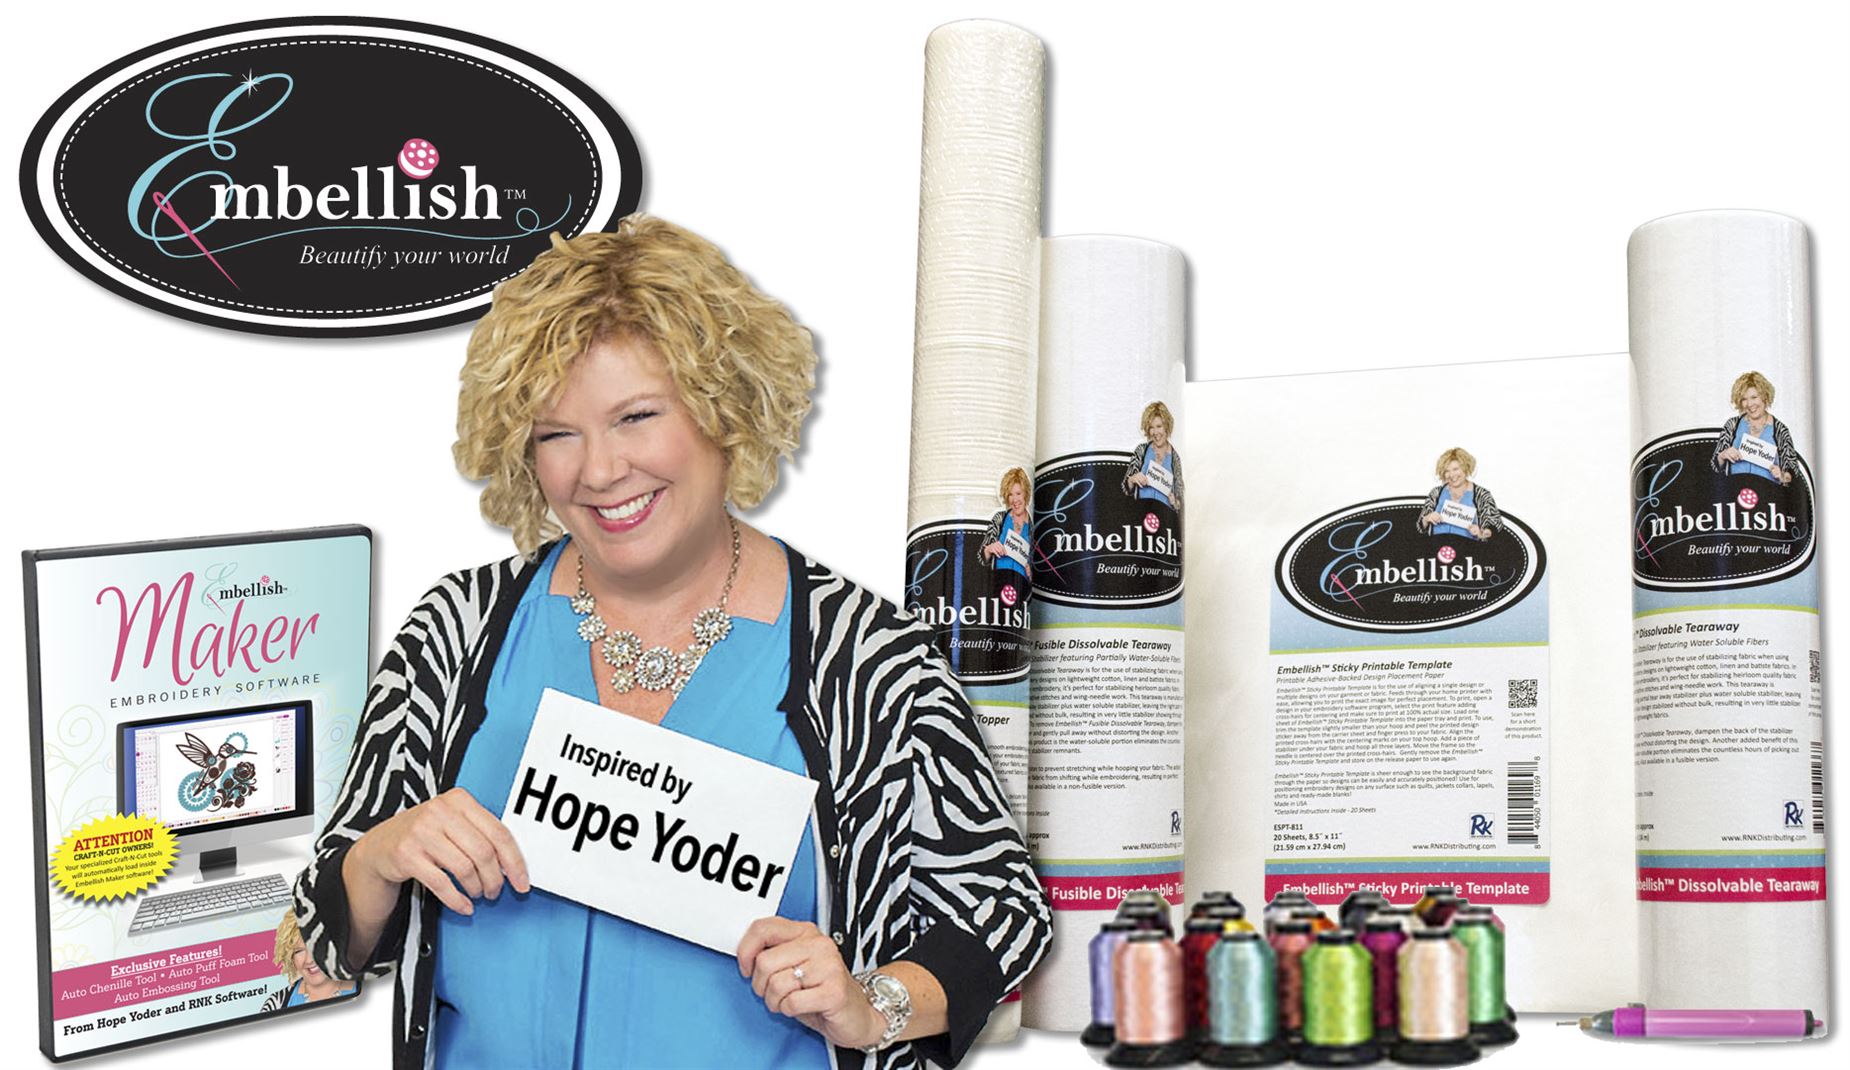 photo of Embellish products with Hope Yoder